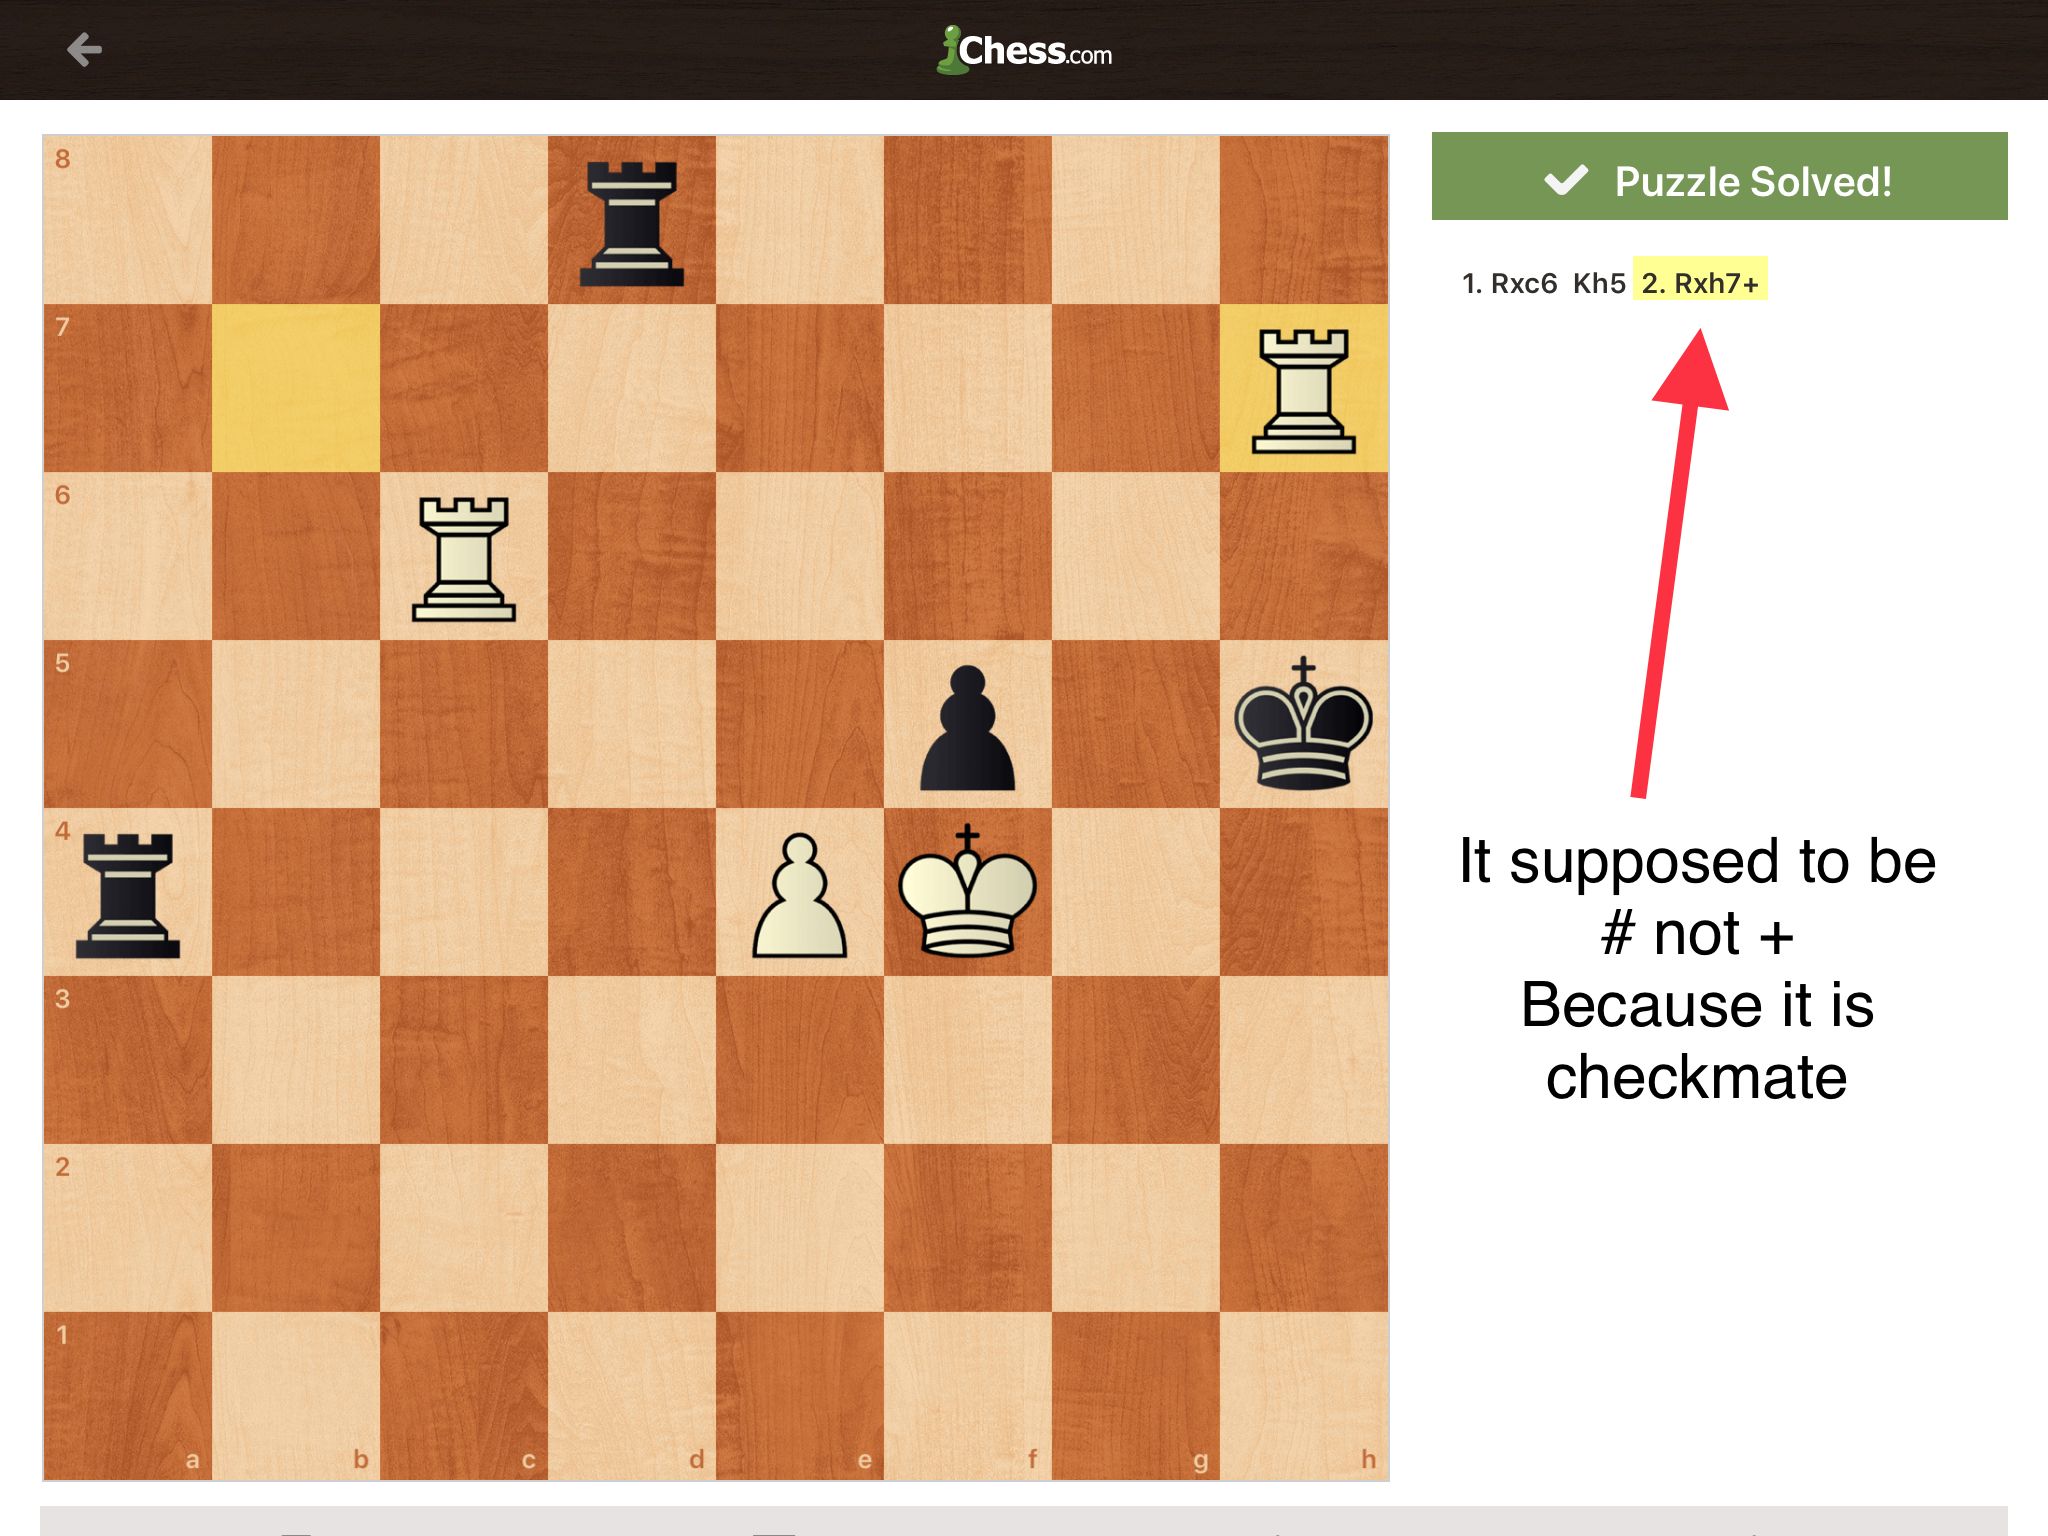 How to Use Chess Notation